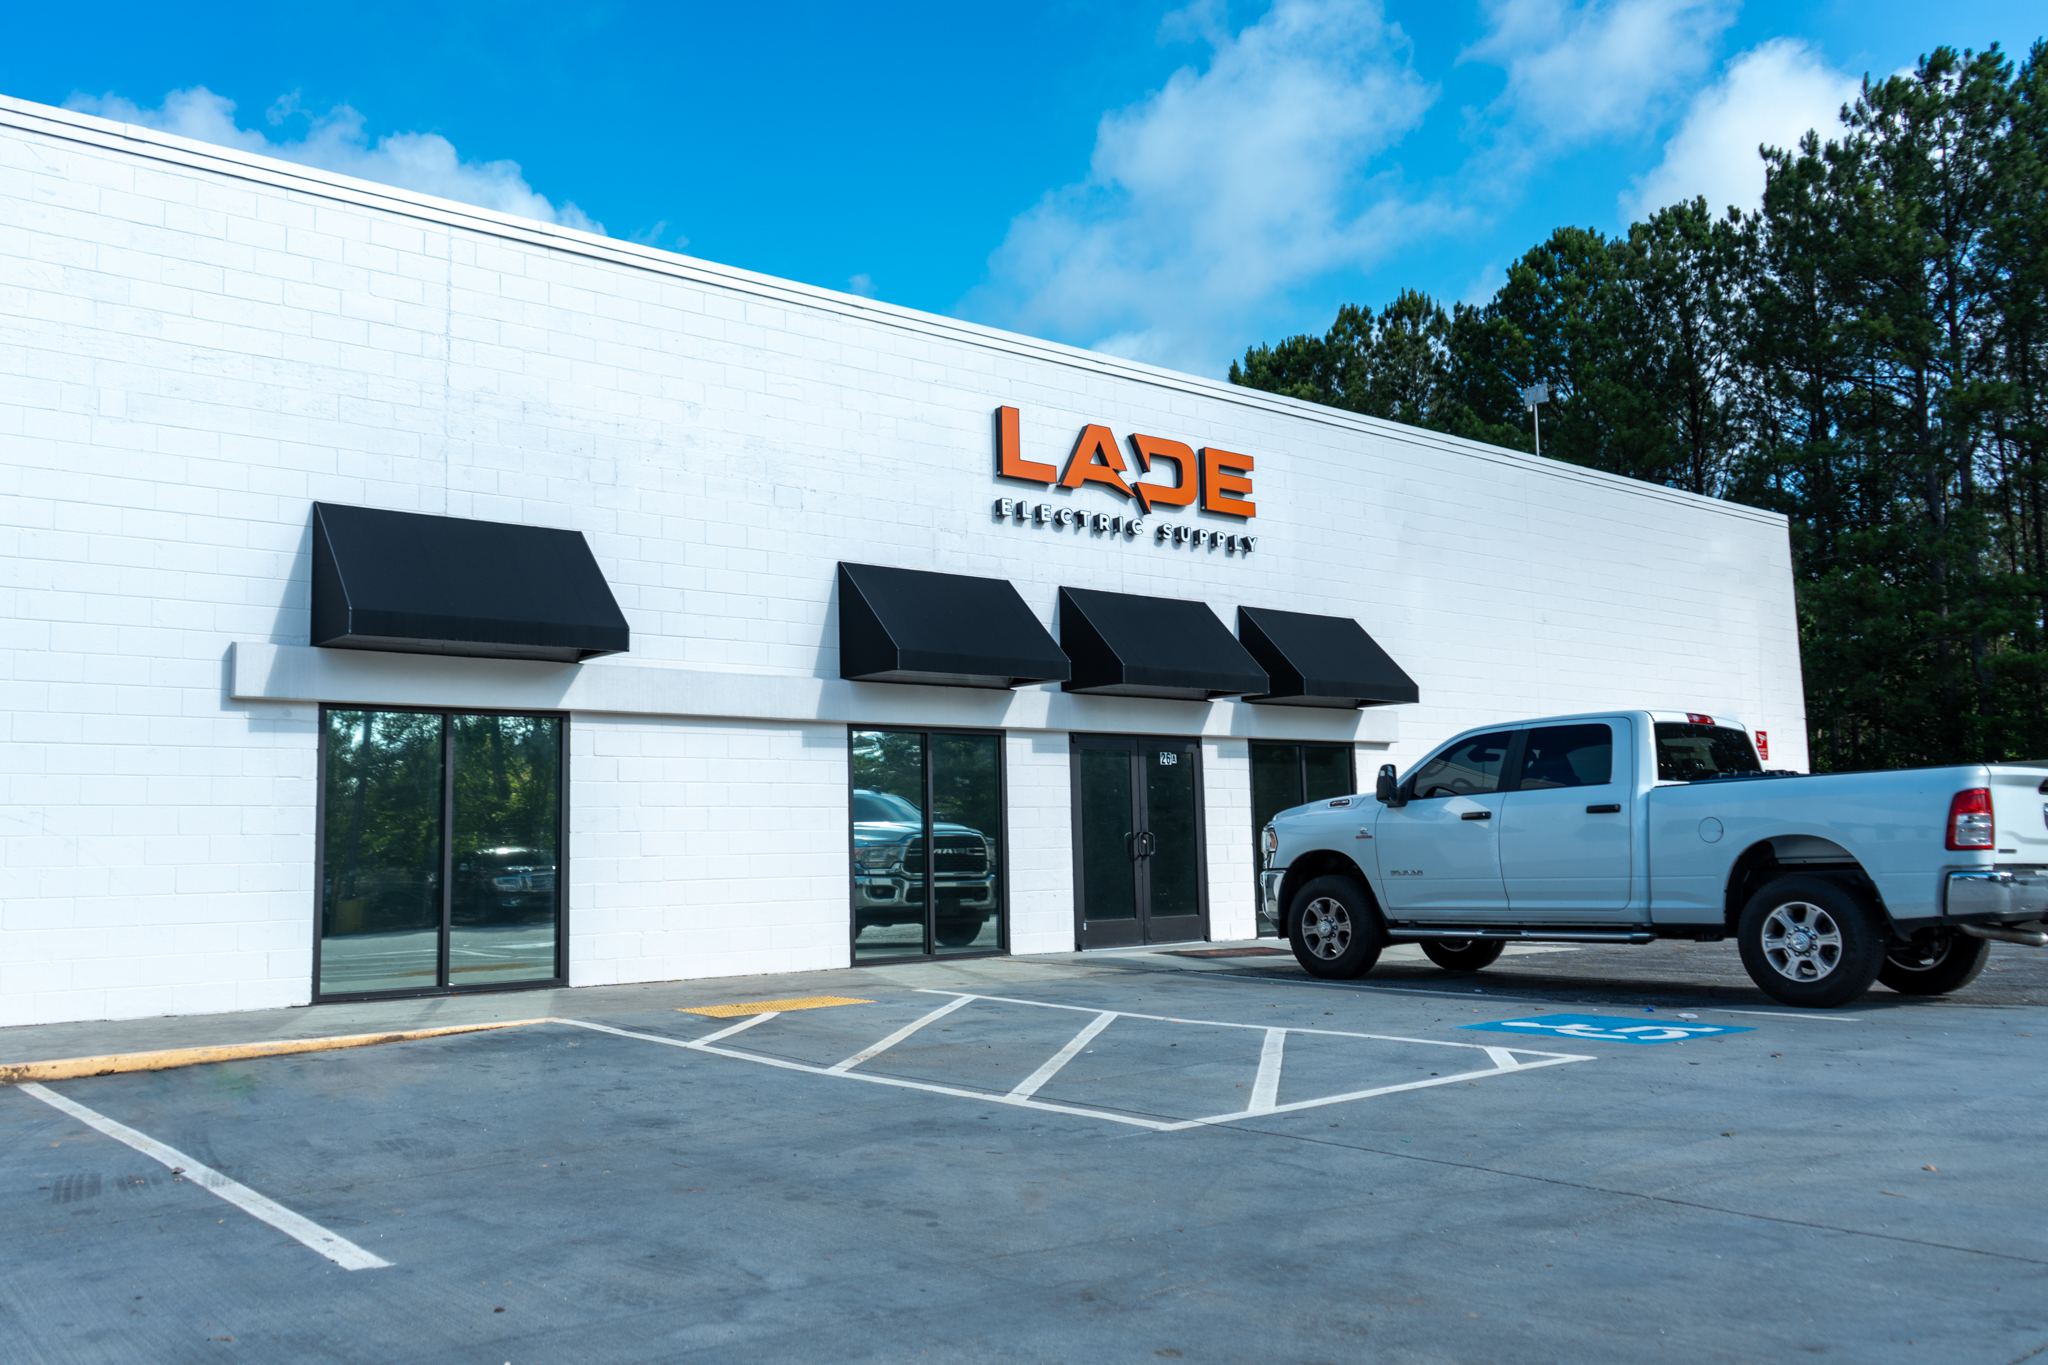 Exterior photo of Lade Supply Branch in Hiram, showing the store entrance and the company branding.